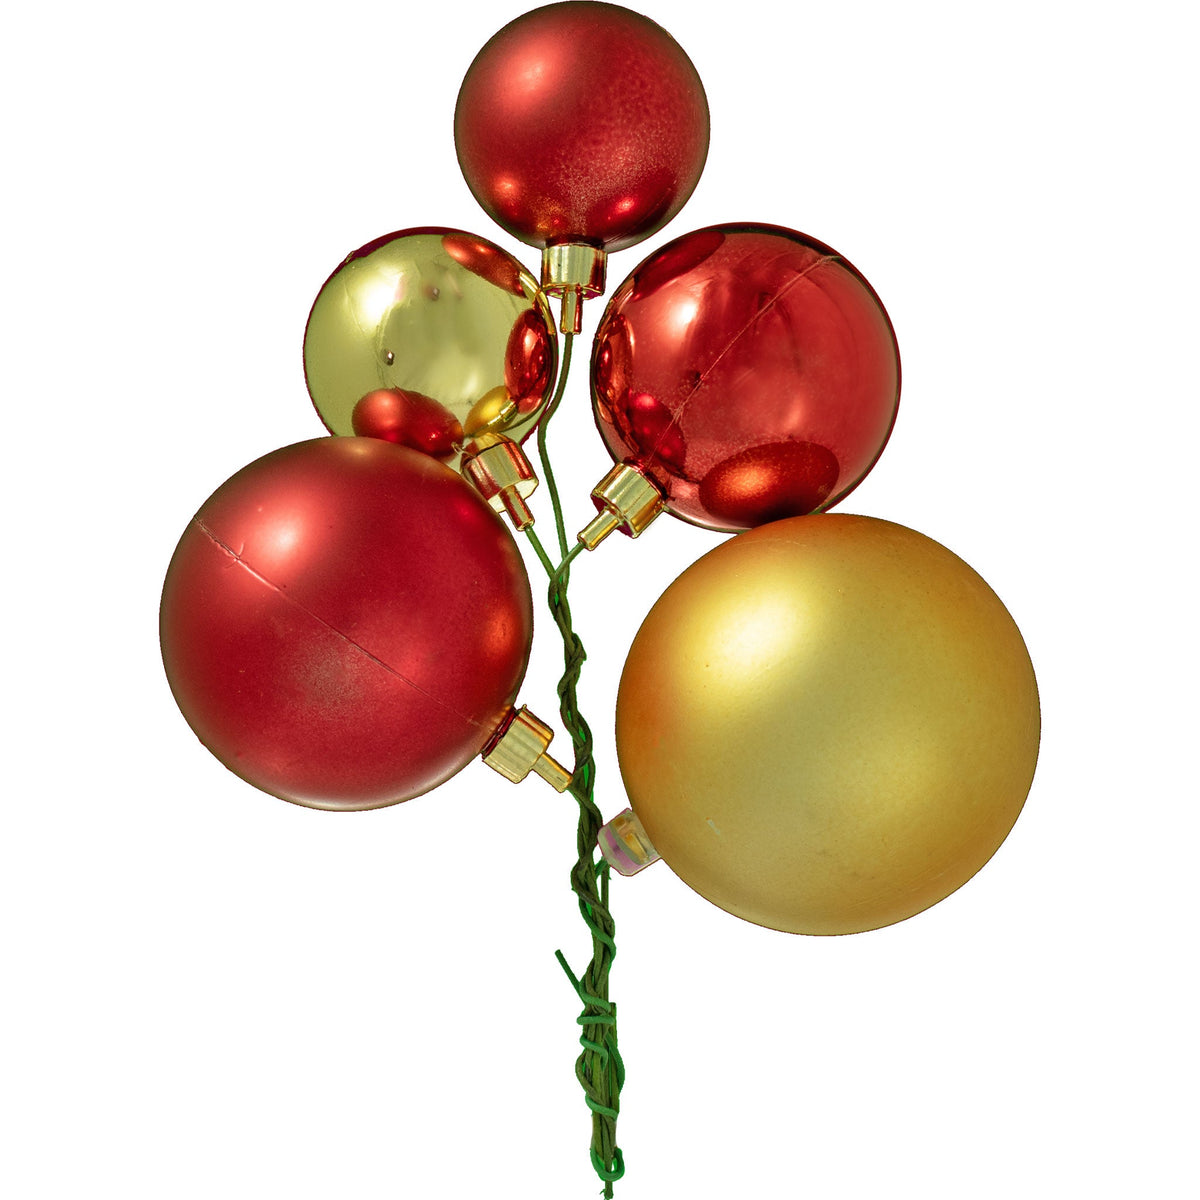 Colors include:  2 - Shiny Red Ball Ornaments (60MM & 50MM) 1 - Matte Red Ball Ornament (70MM) 1 - Shiny Gold Ball Ornament (50MM) 1 - Matte Gold Ball Ornament (80MM)